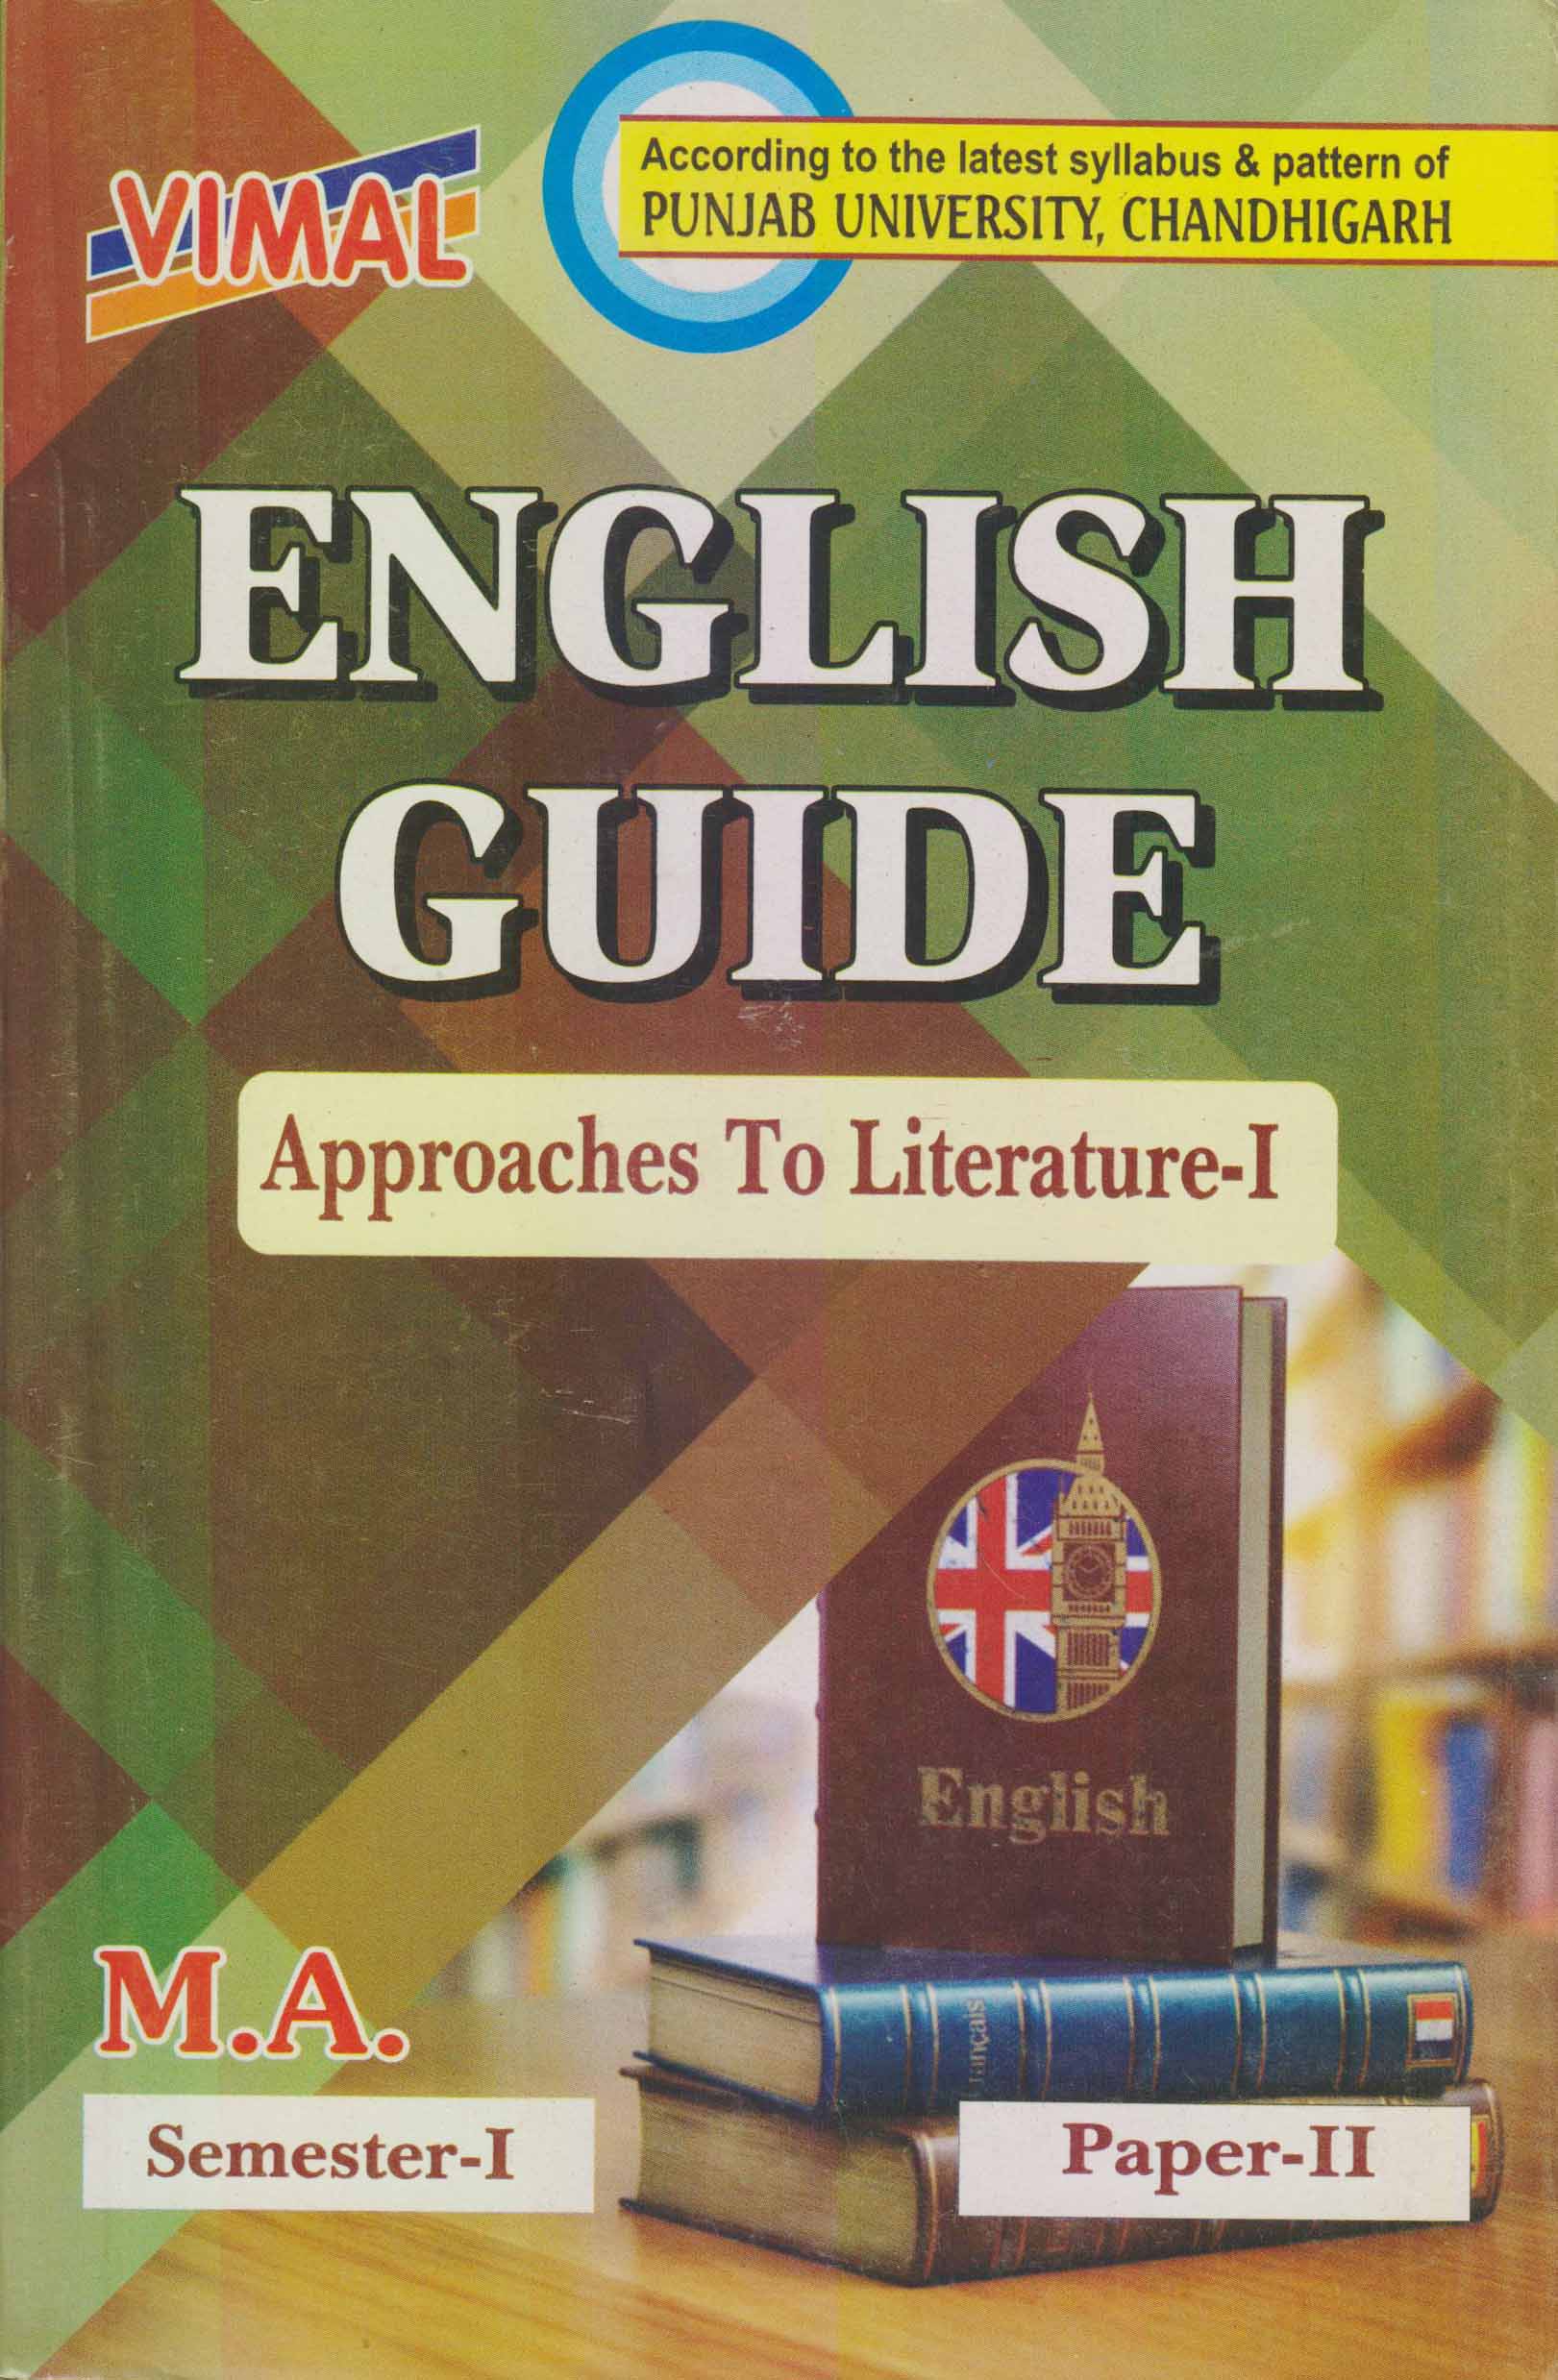 Vimal English Guide Approaches To Literature-I for M.A. Sem. 1, (Paper II) New Edition